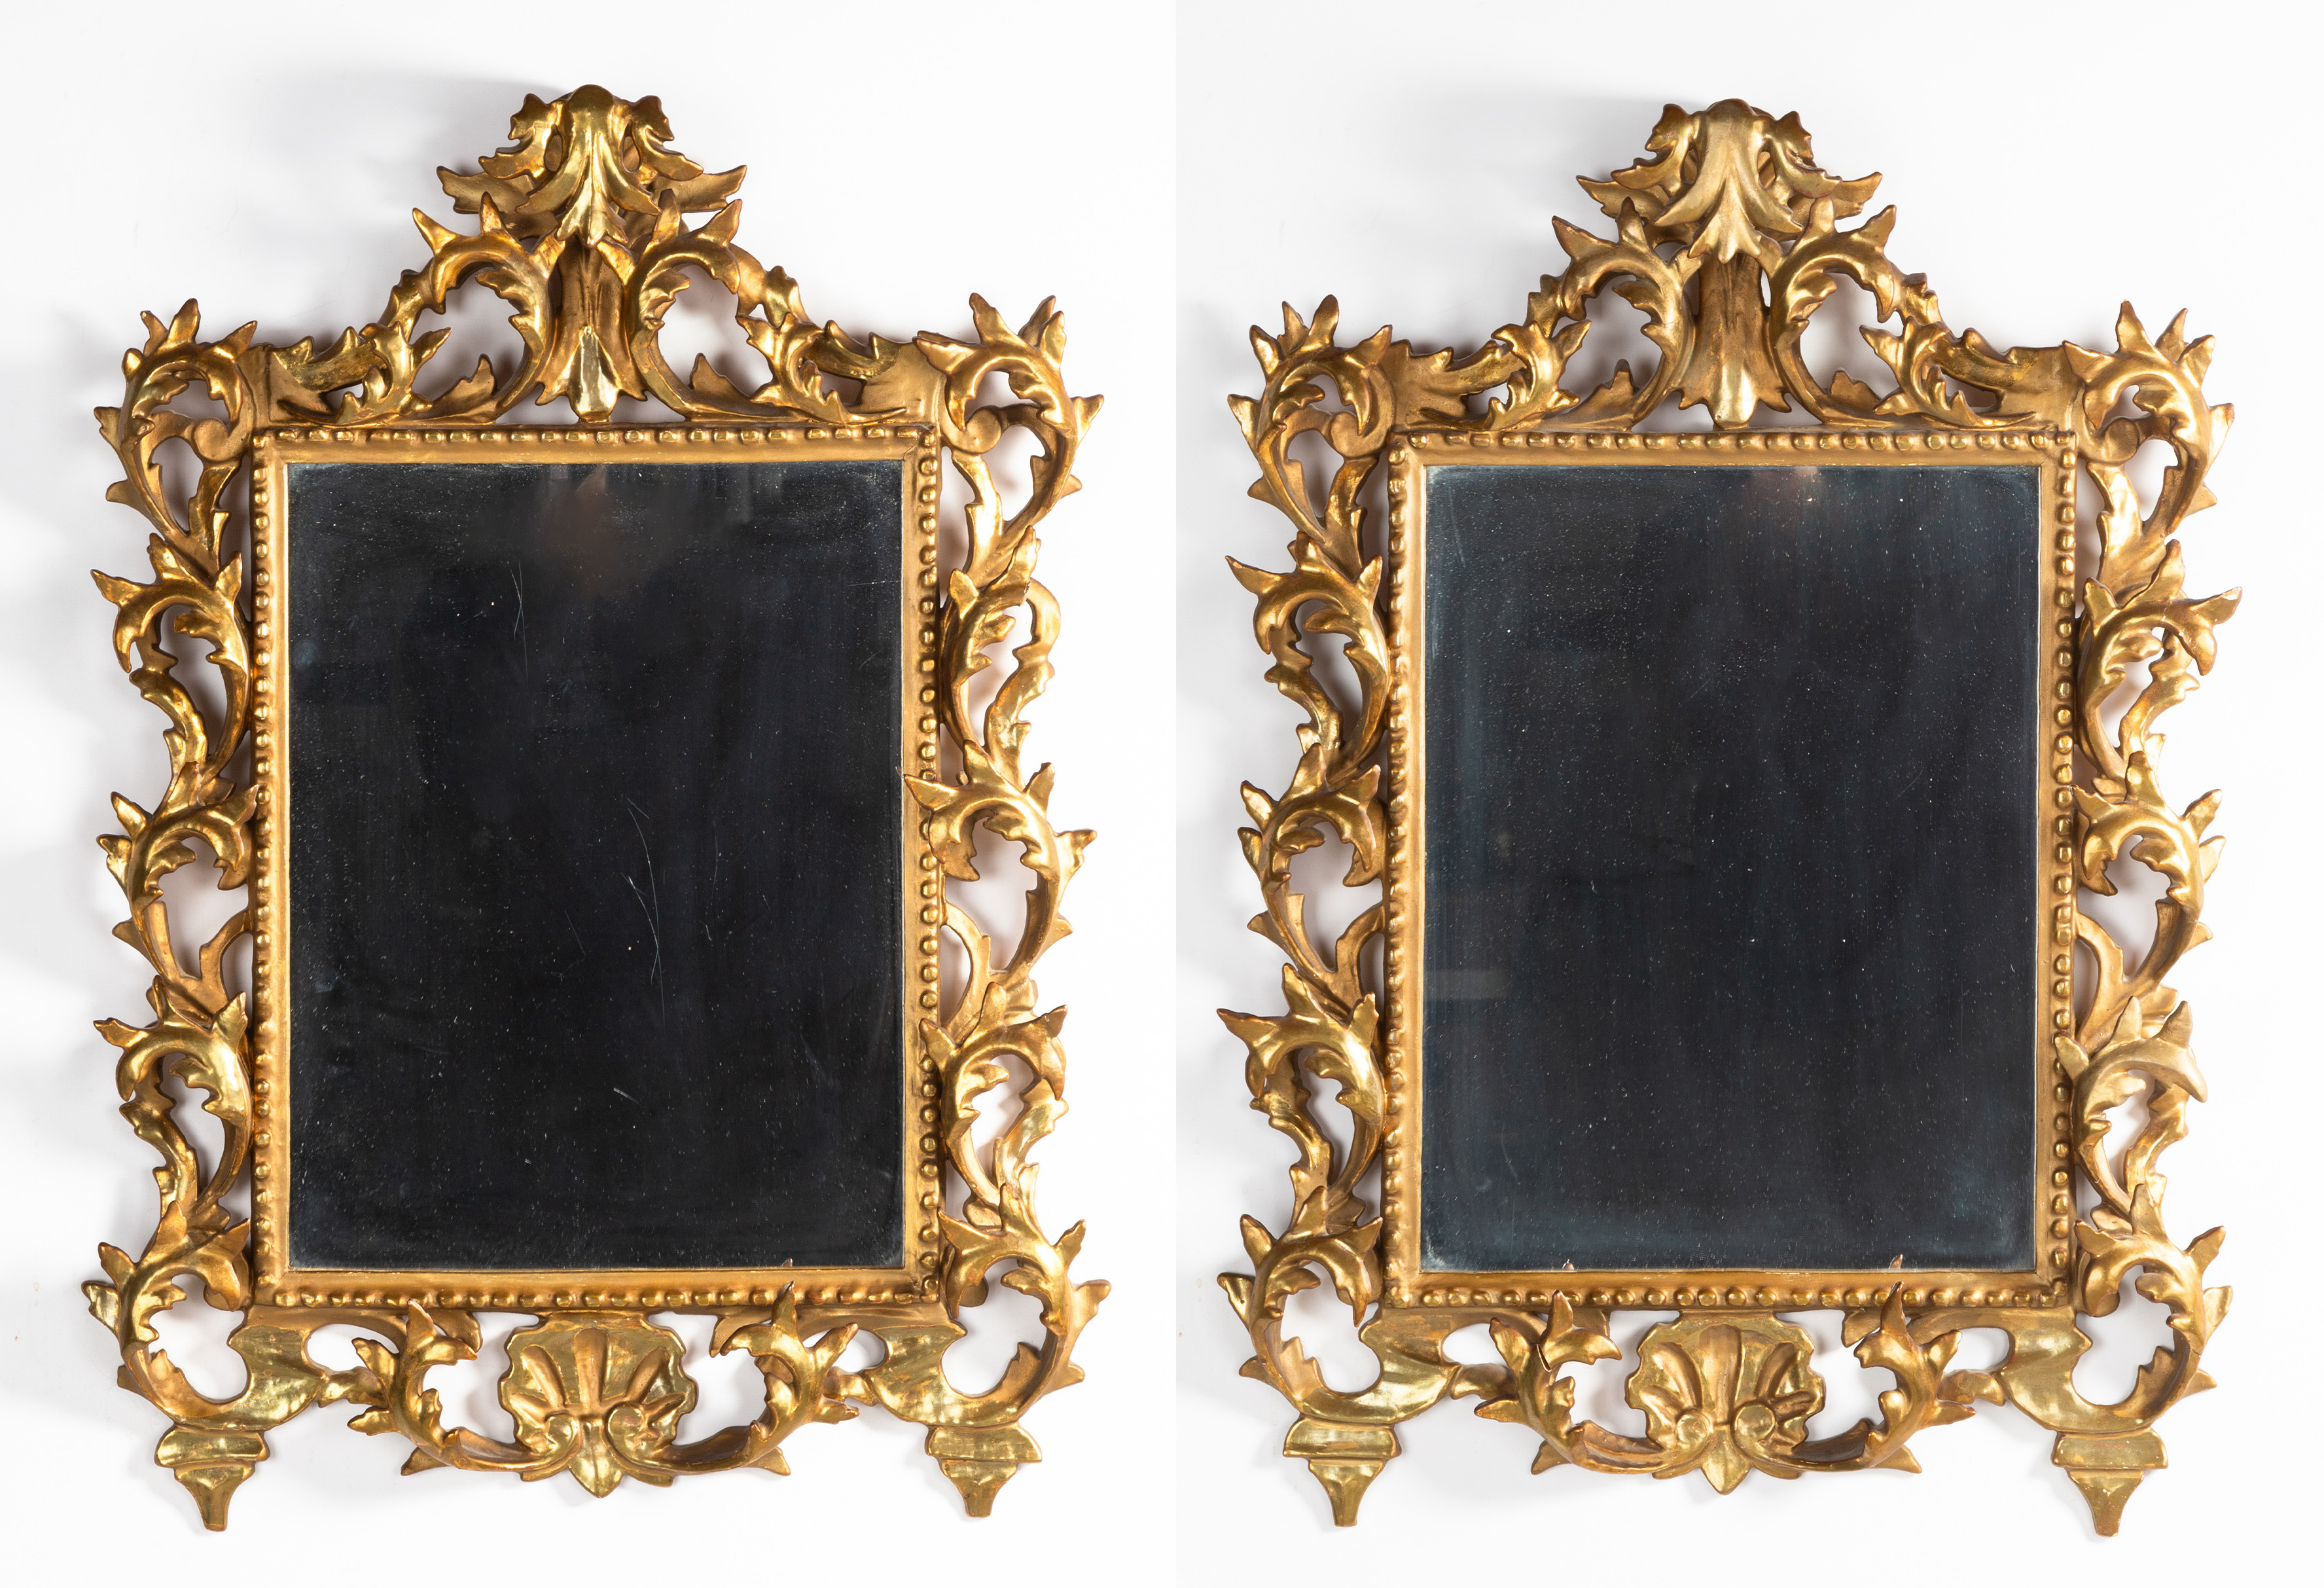 PAIR OF ITALIAN ROCOCO STYLE GILTWOOD 2faf73d